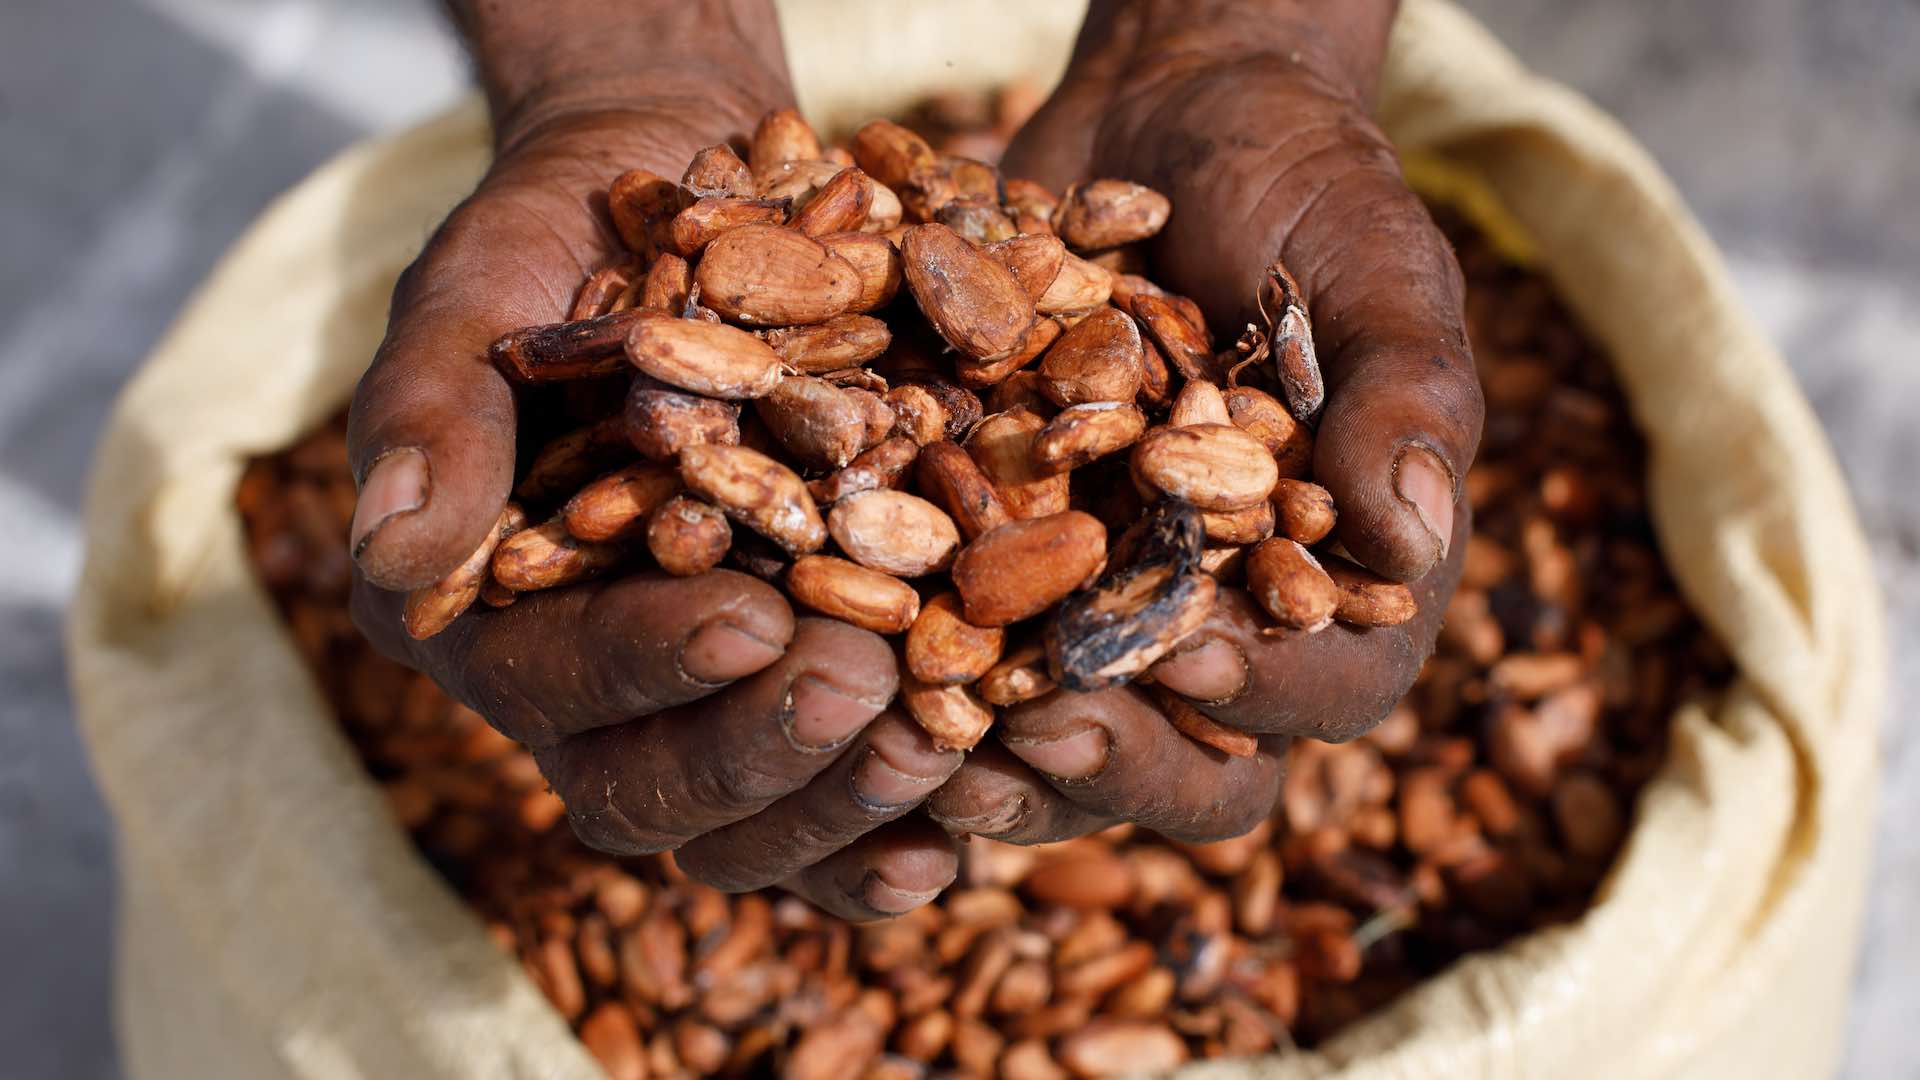 Cocoa prices surge as bad weather hits West Africa crop yield